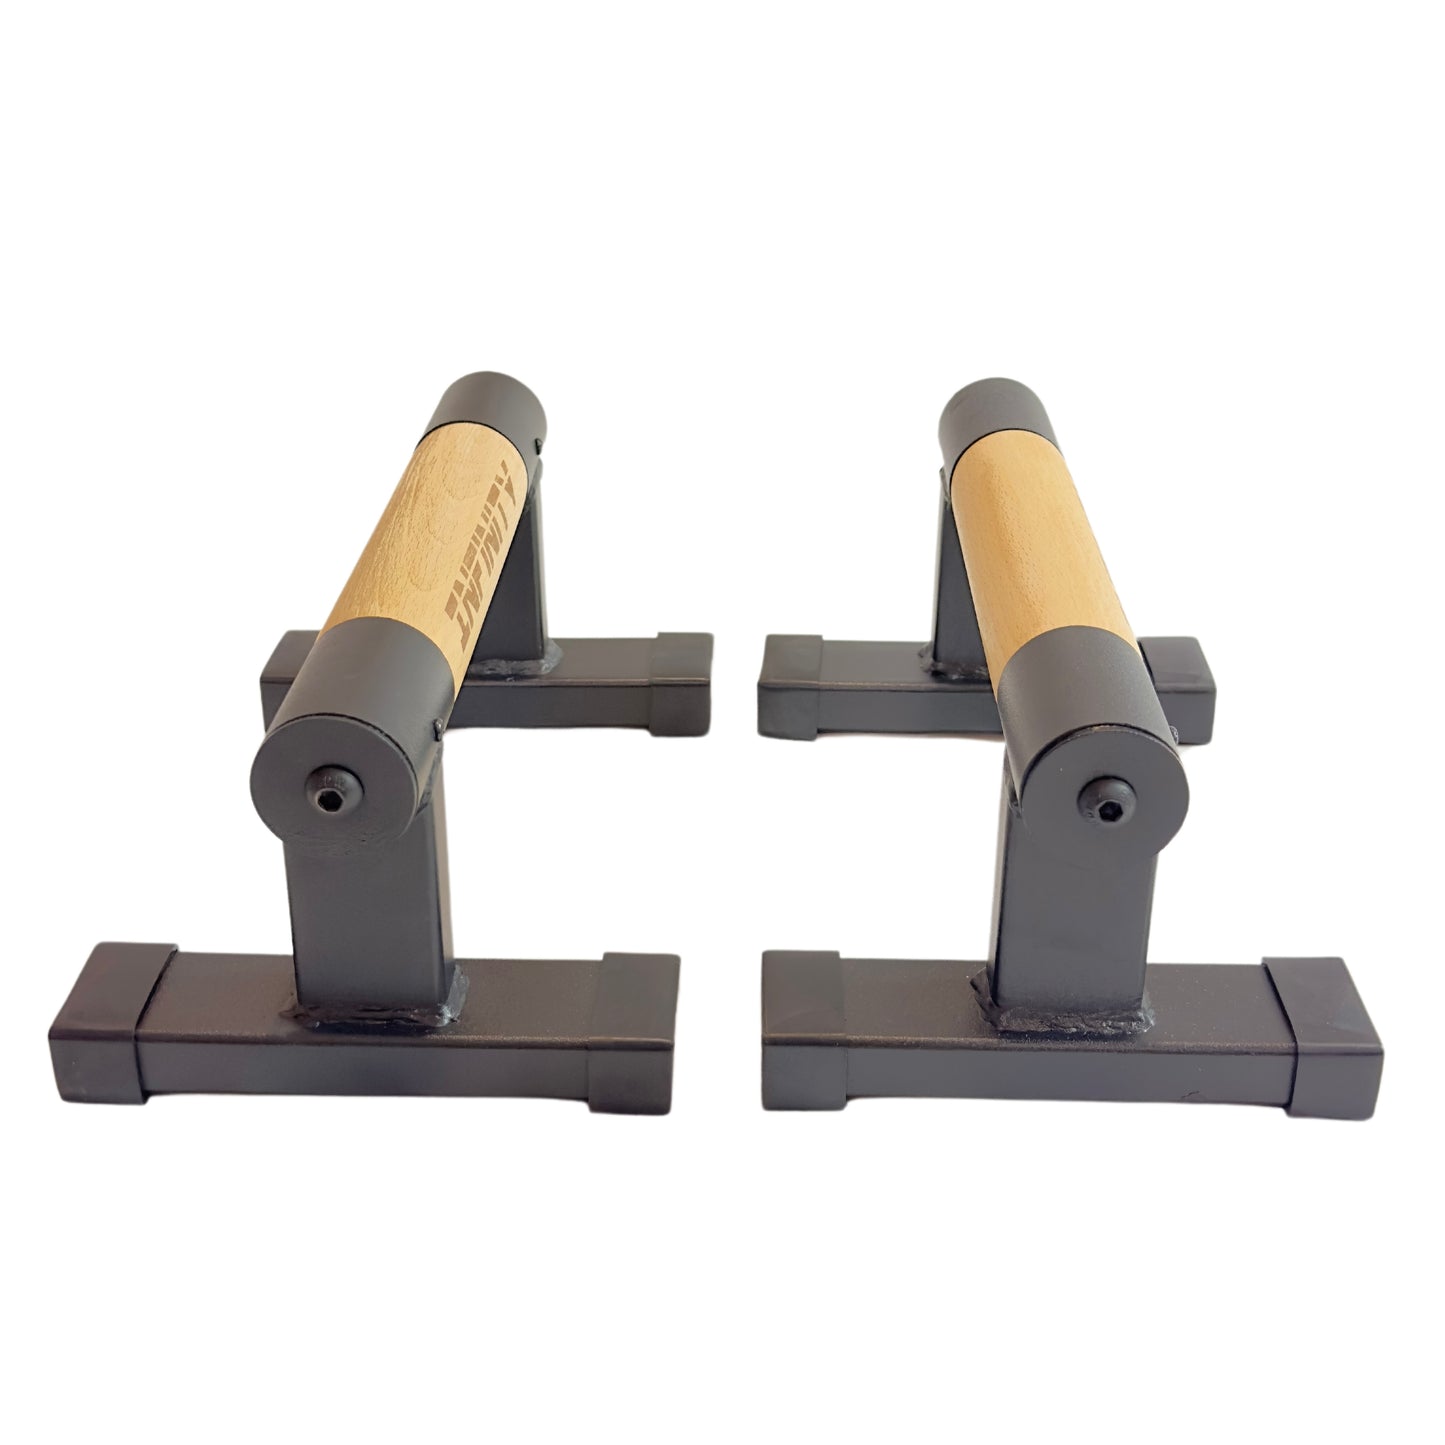 Travellettes Small Parallettes For Travelling Wooden Handles For Callisthenics gymnastics Crossfit handstand planche